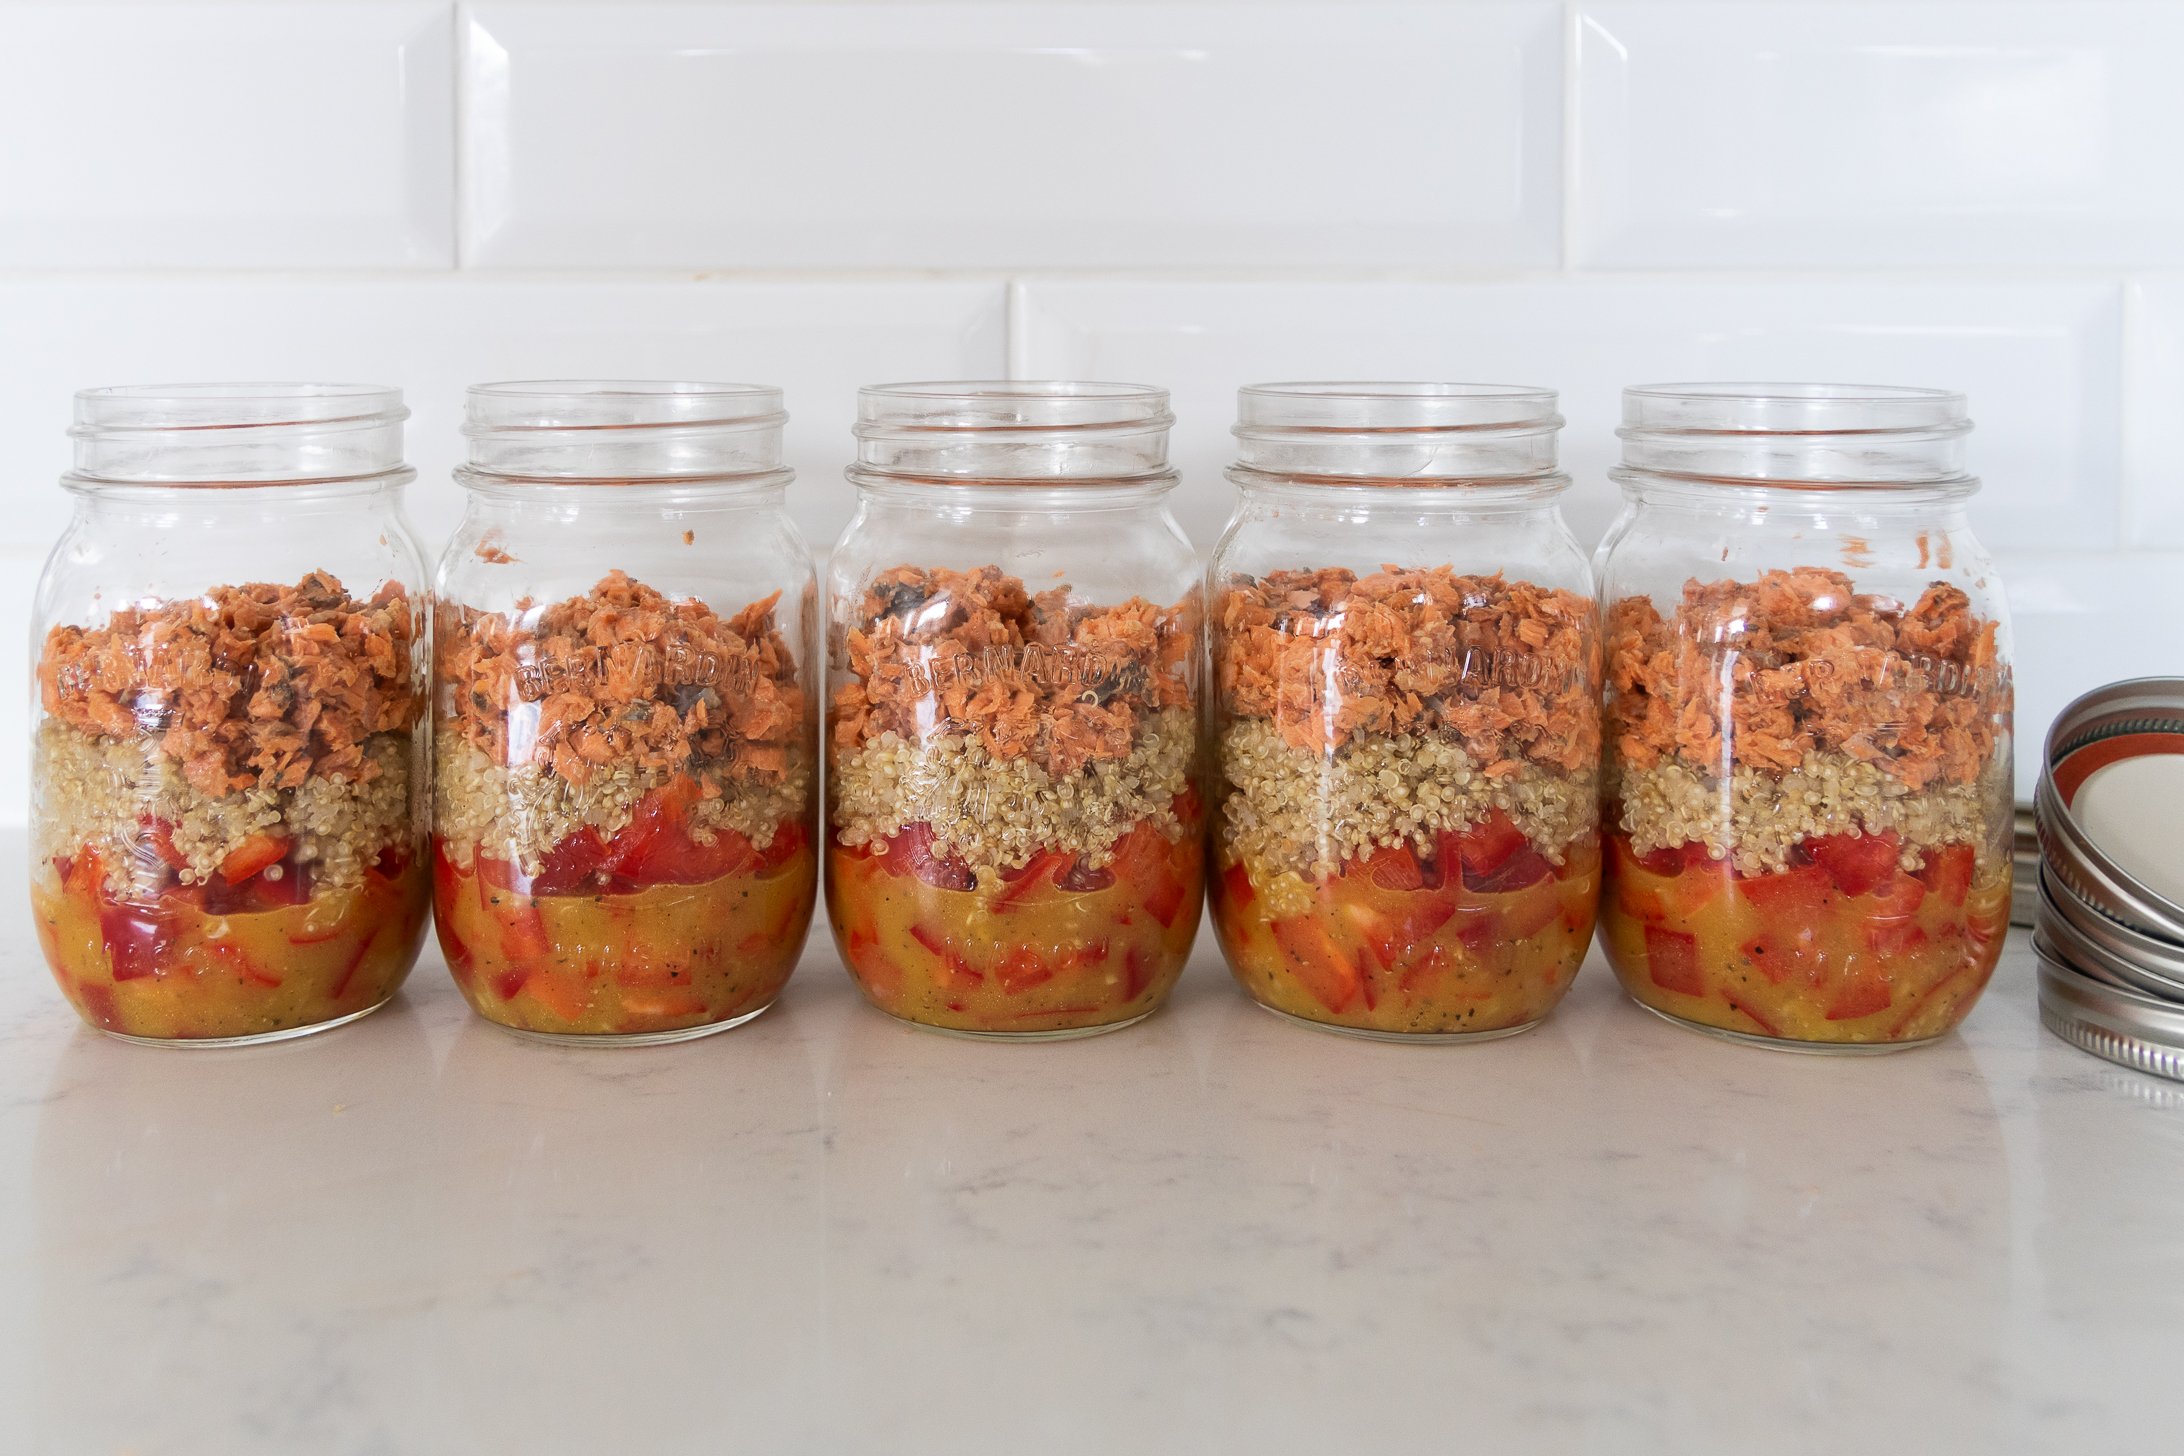 Five mason jars filled with dressing, peppers, quinoa and salmon leaning against a white background.